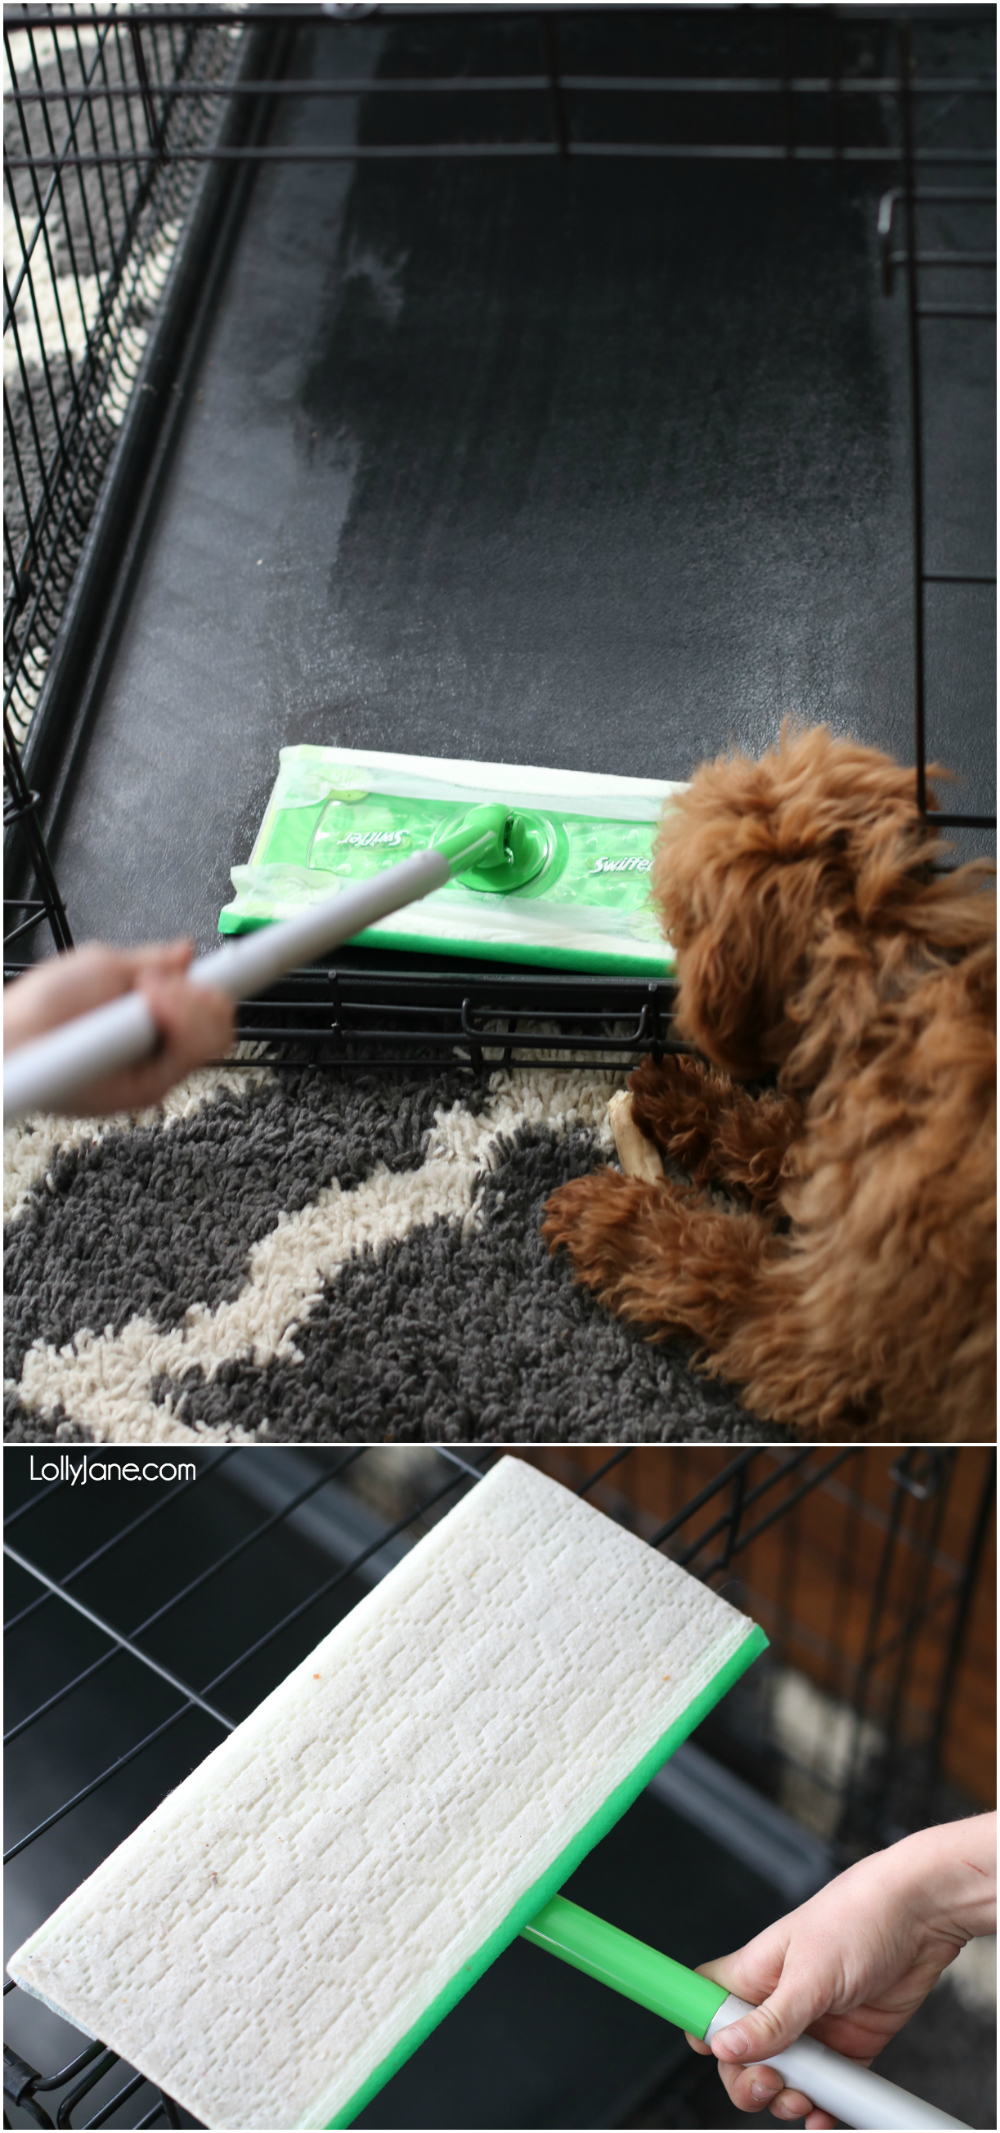 No pet smells here! Check out these EASY tips to keep your home smelling pet-free while enjoying your fur babies! #DontSweatYourPet #SwifferFanatic #pets #petsofpinterest #cleanallthethings #petcleaningremedy #swiffer